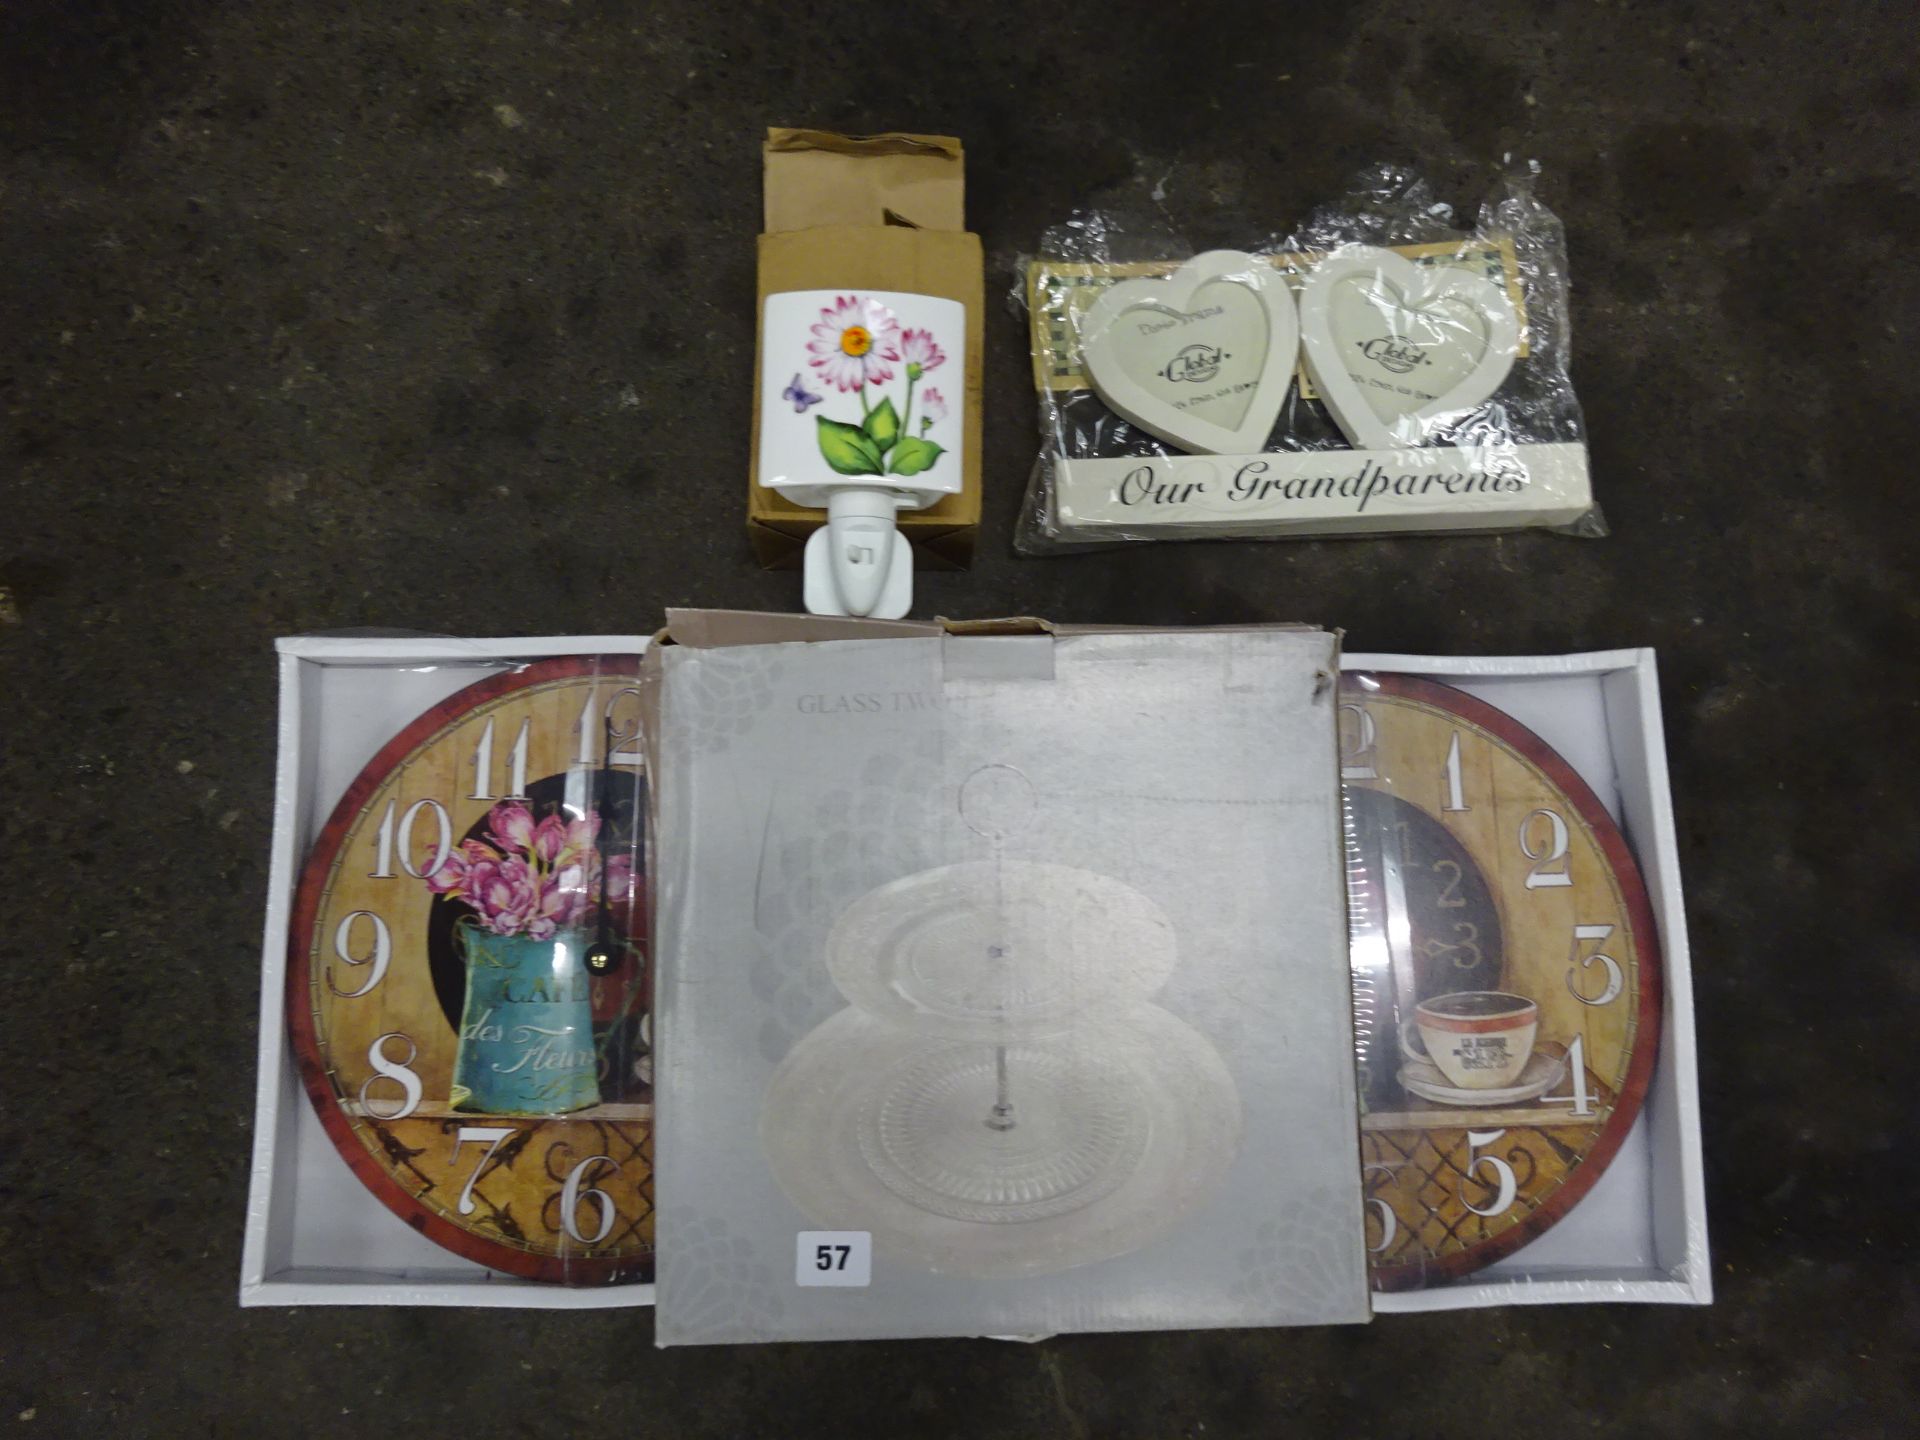 2 WALL CLOCKS, CAKE STAND & PICTURE FRAME